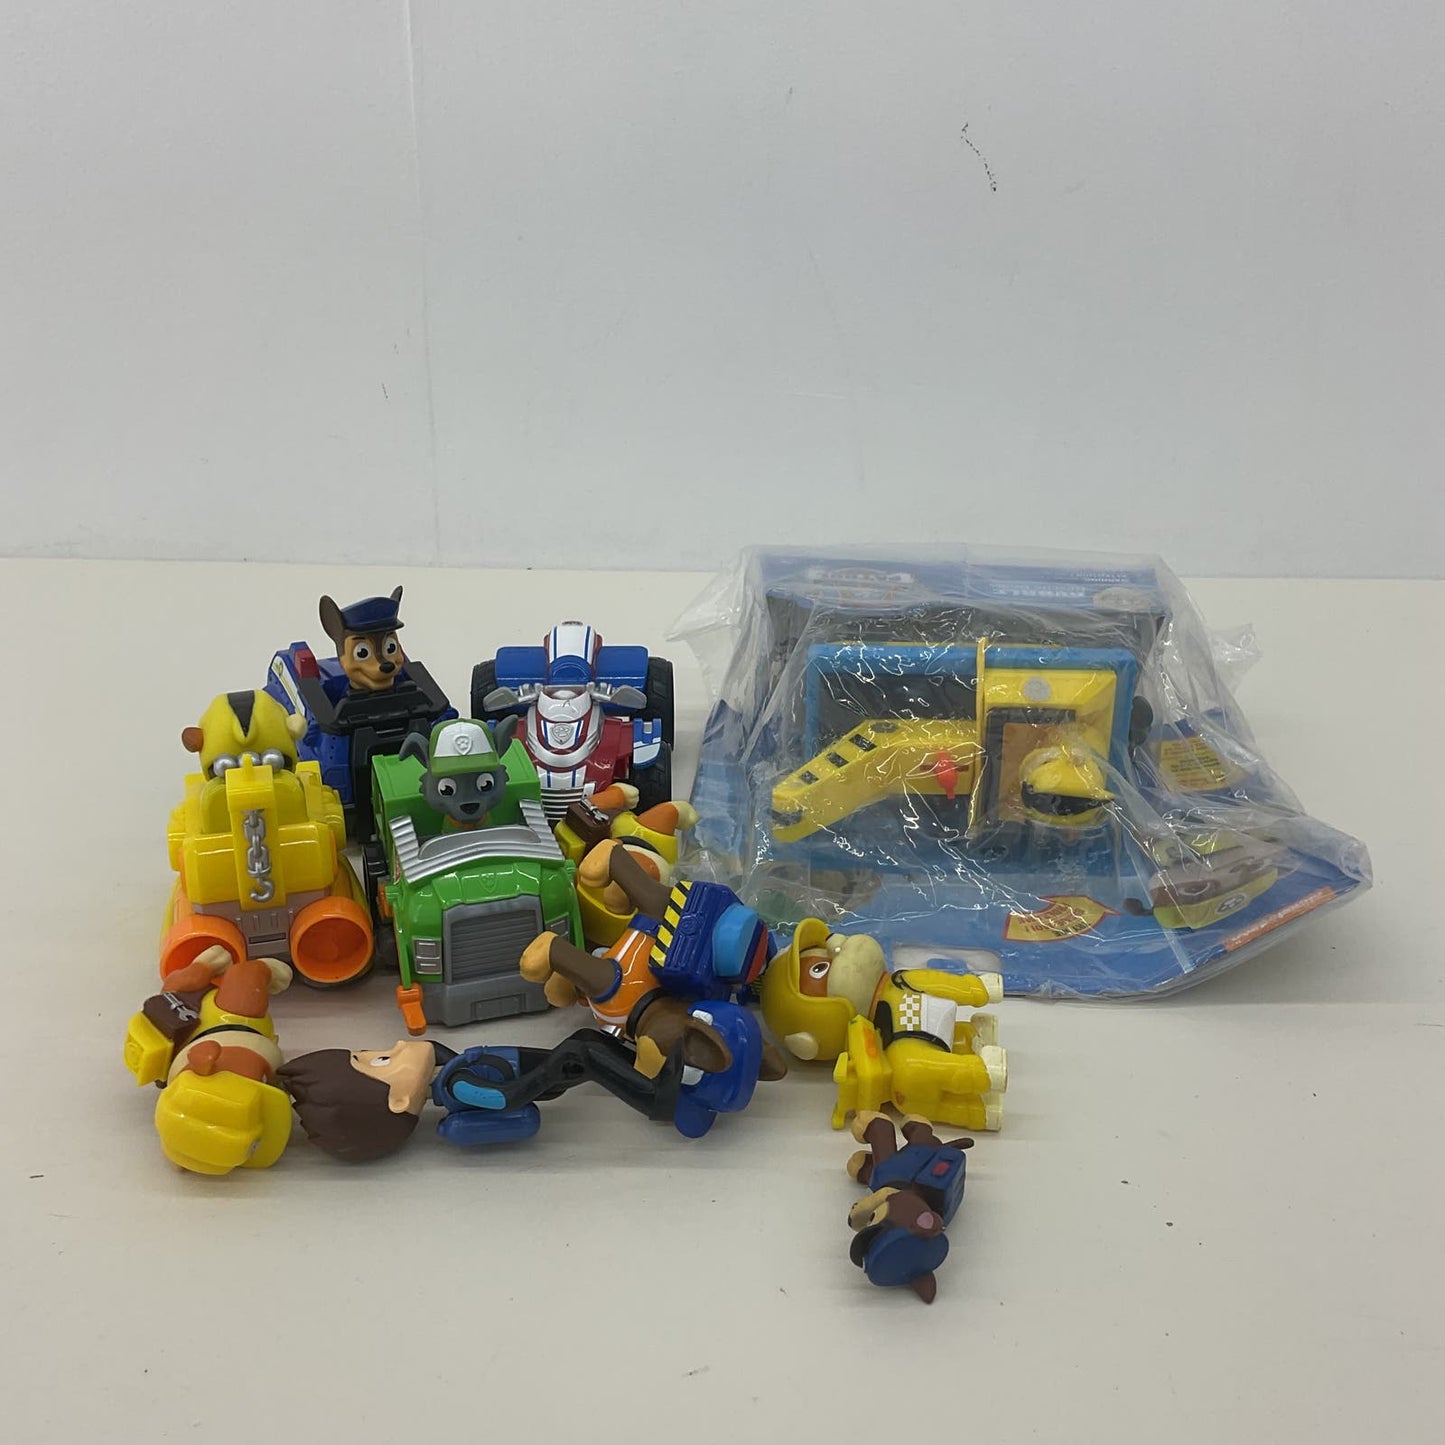 Paw Patrol Action Figure Mixed Toys LOT Vehicles Cars Dog Characters Loose - Warehouse Toys